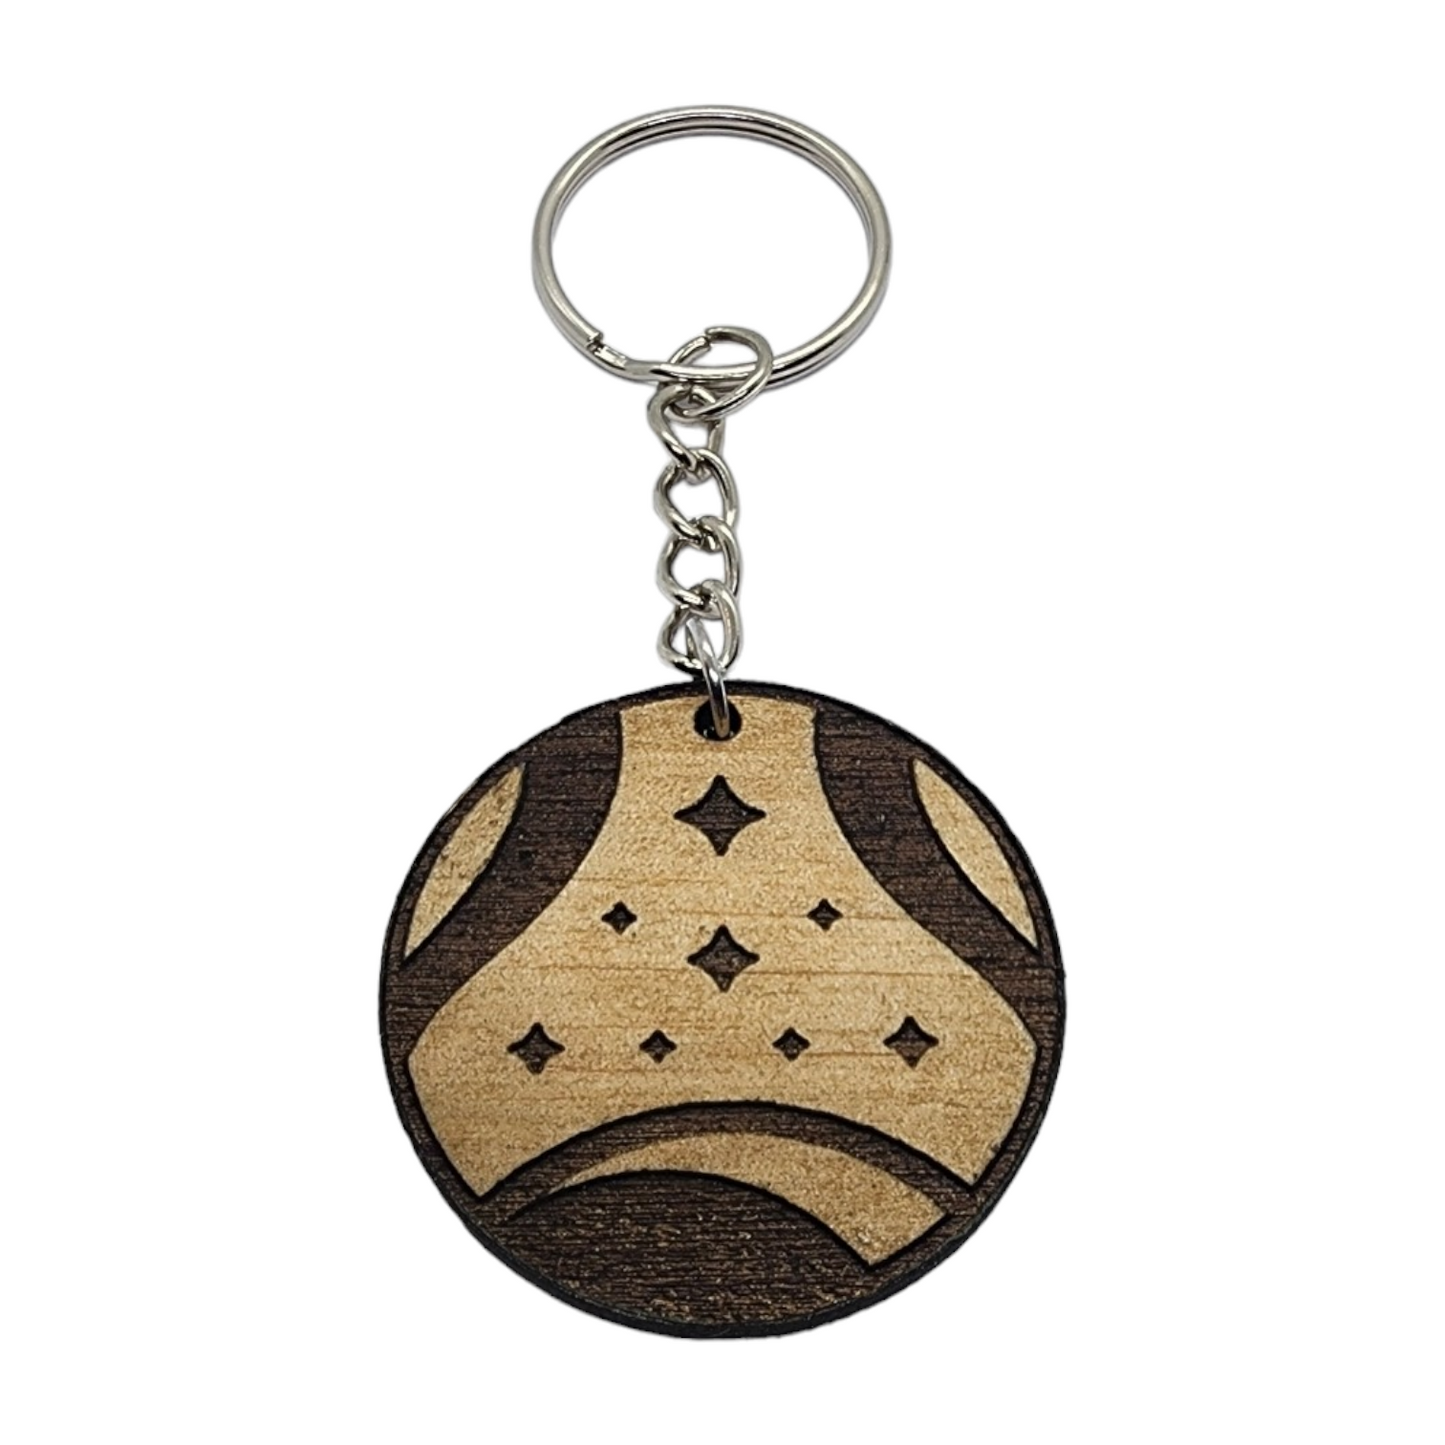 Starfield Constellation Faction Symbol Design Wood Painted/Stained Key Chain Handmade Laser Cut/Engraved